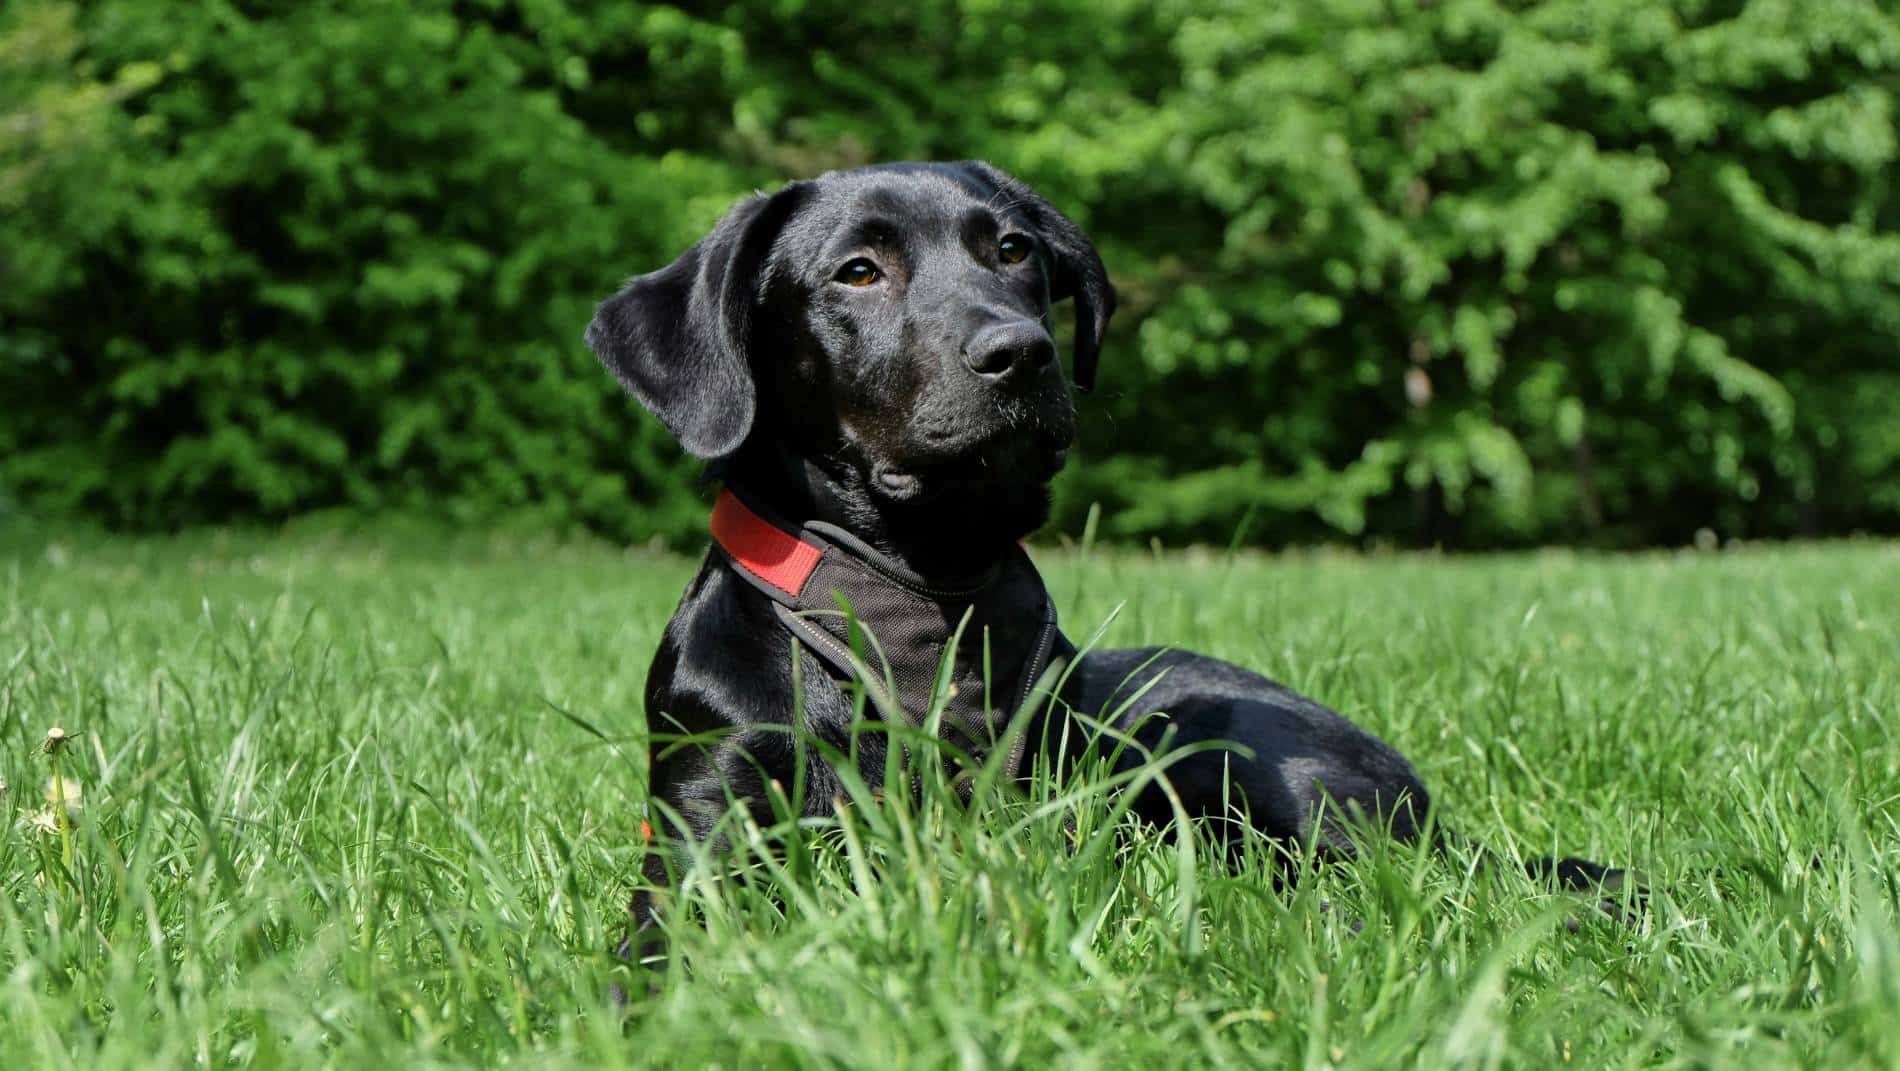 Black dog sitting in the grass in a park